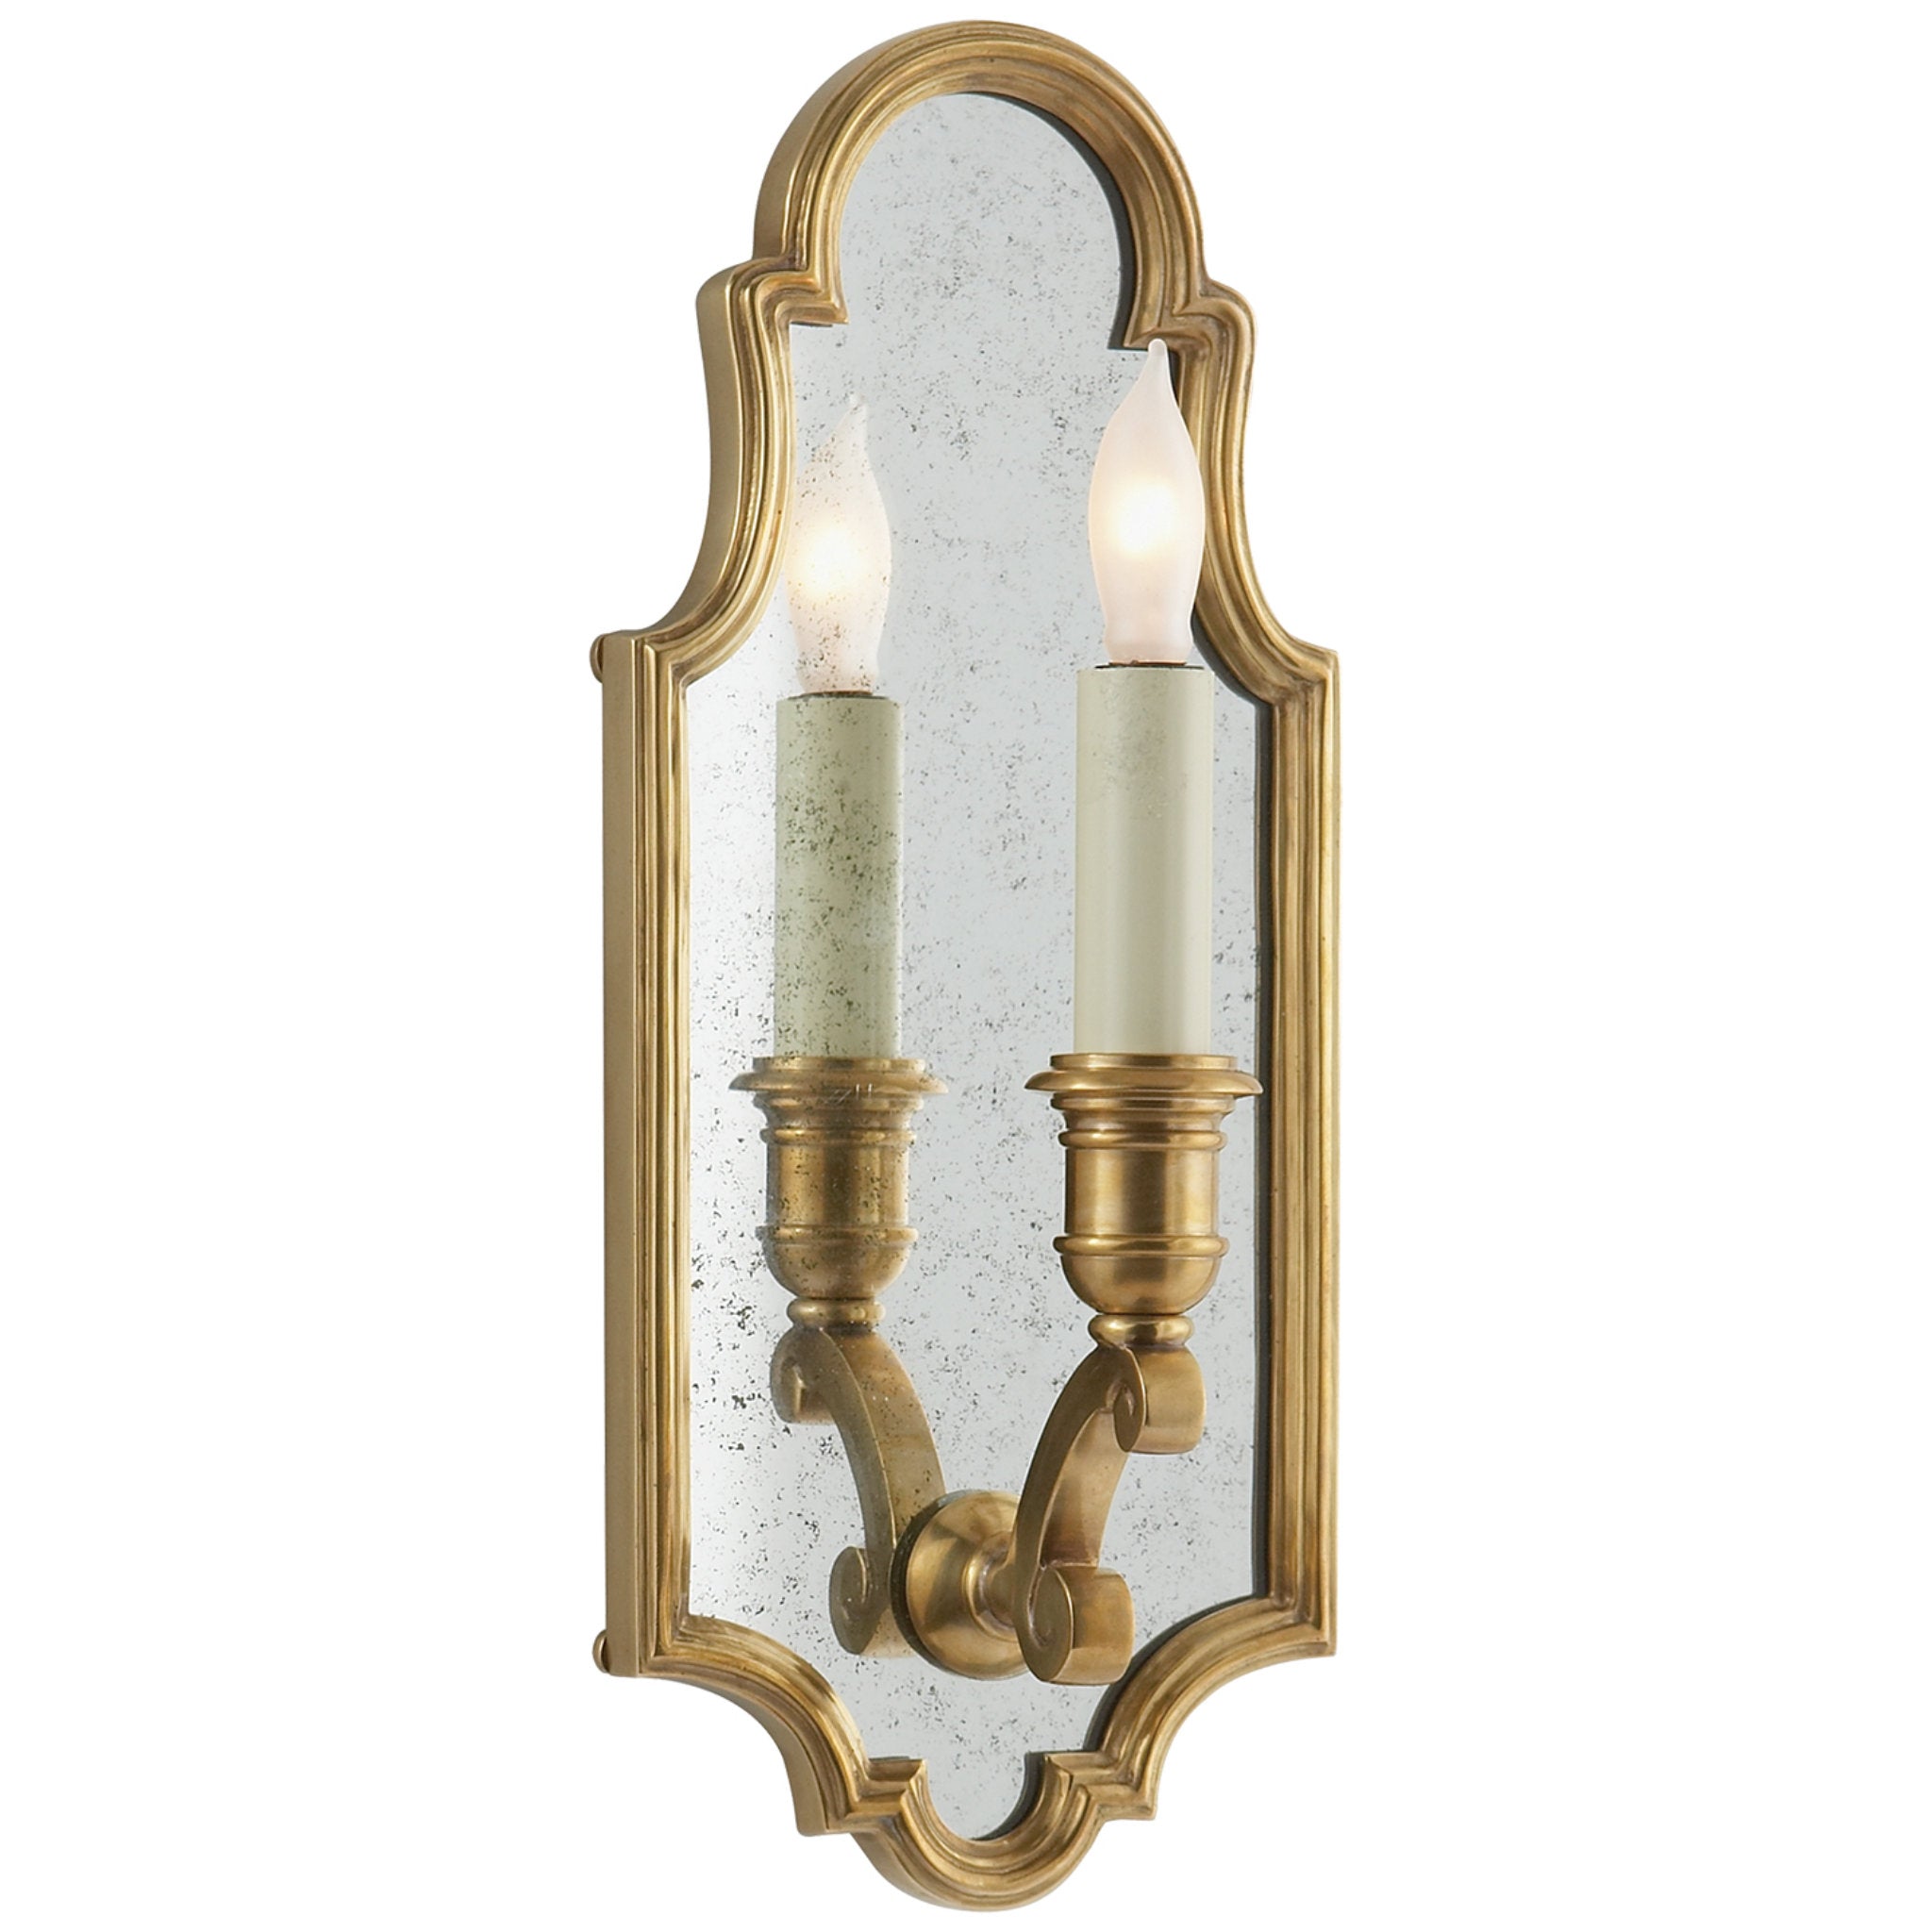 Chapman & Myers Sussex Small Framed Sconce in Antique-Burnished Brass with Antique Mirror